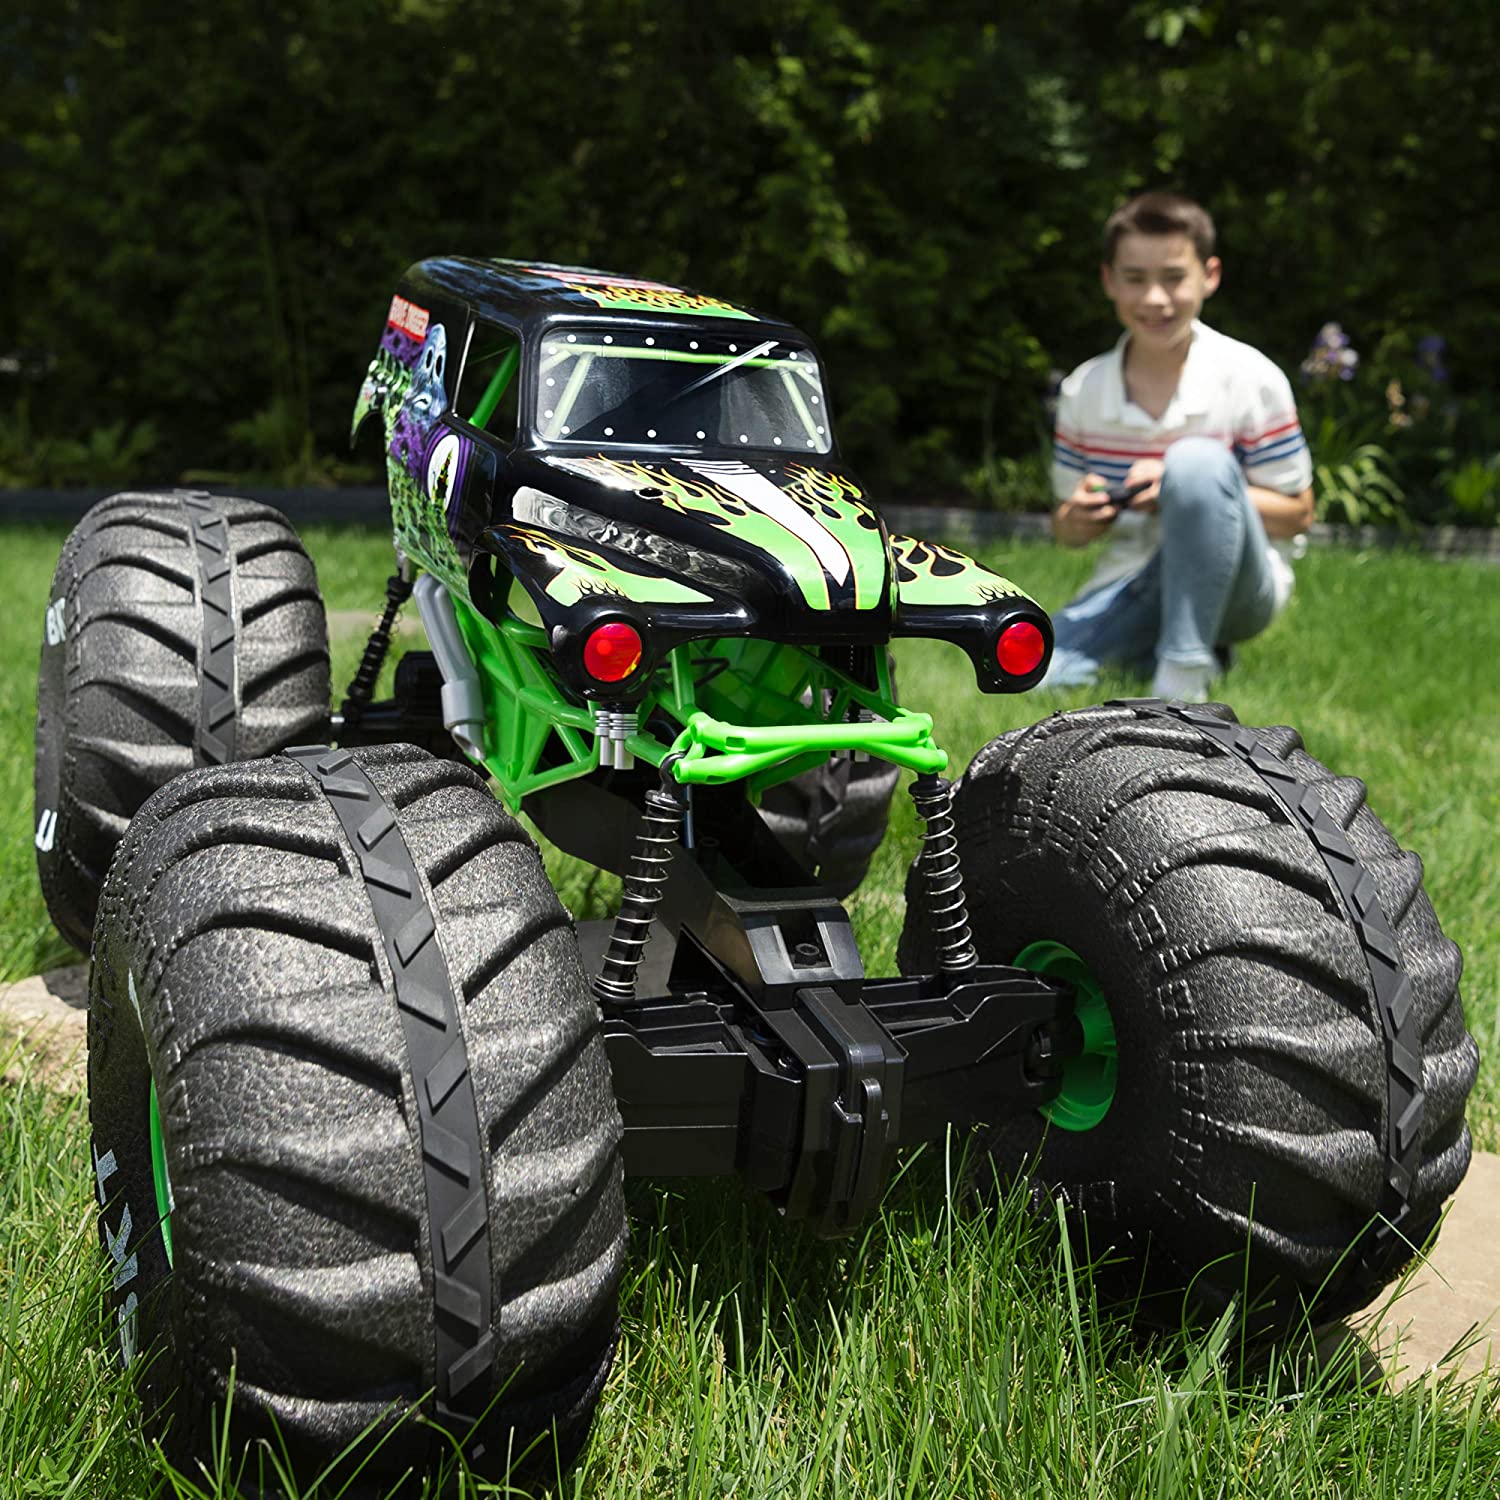 Monster Jam, Official Mega Grave Digger All-Terrain Remote Control Monster Truck with Lights, 1: 6 Scale